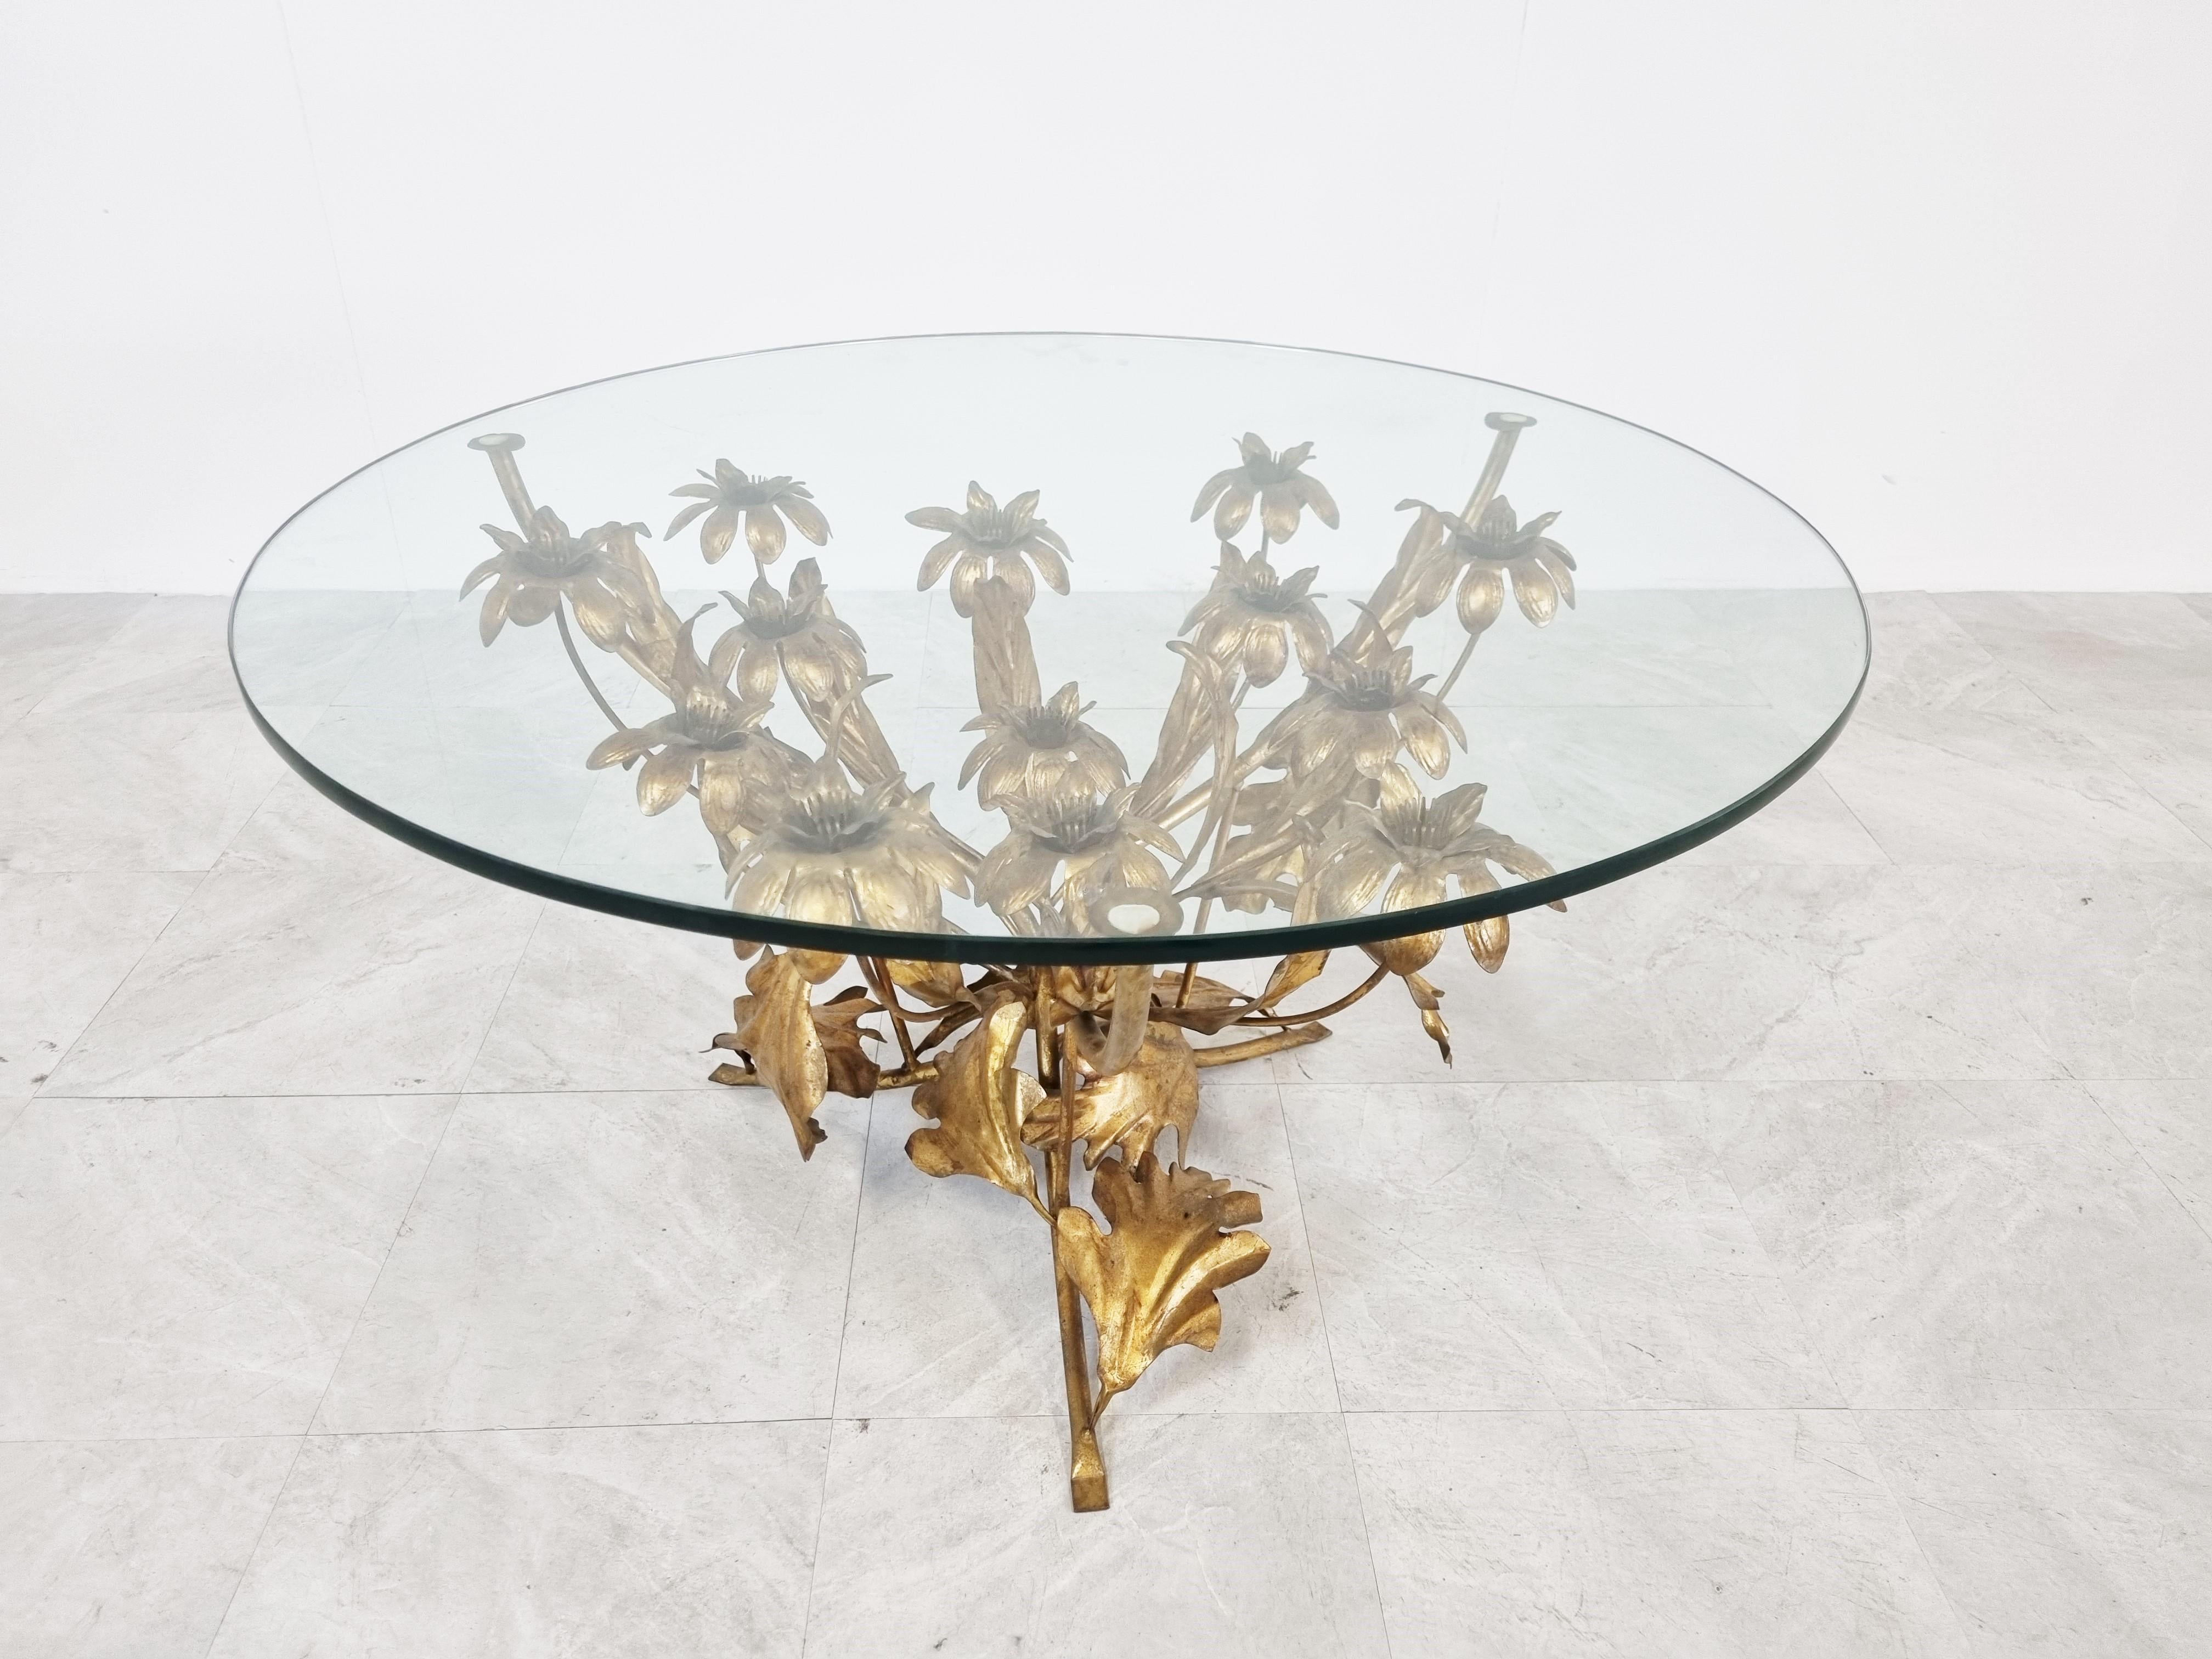 Charming metal flower coffee table with a round clear glass top.

The table was manufactured in italy.

Beautiful elegant look which brings a touch of nature inside your home. 

Good condition, some paint loss.

1960s - Italy

Measures: